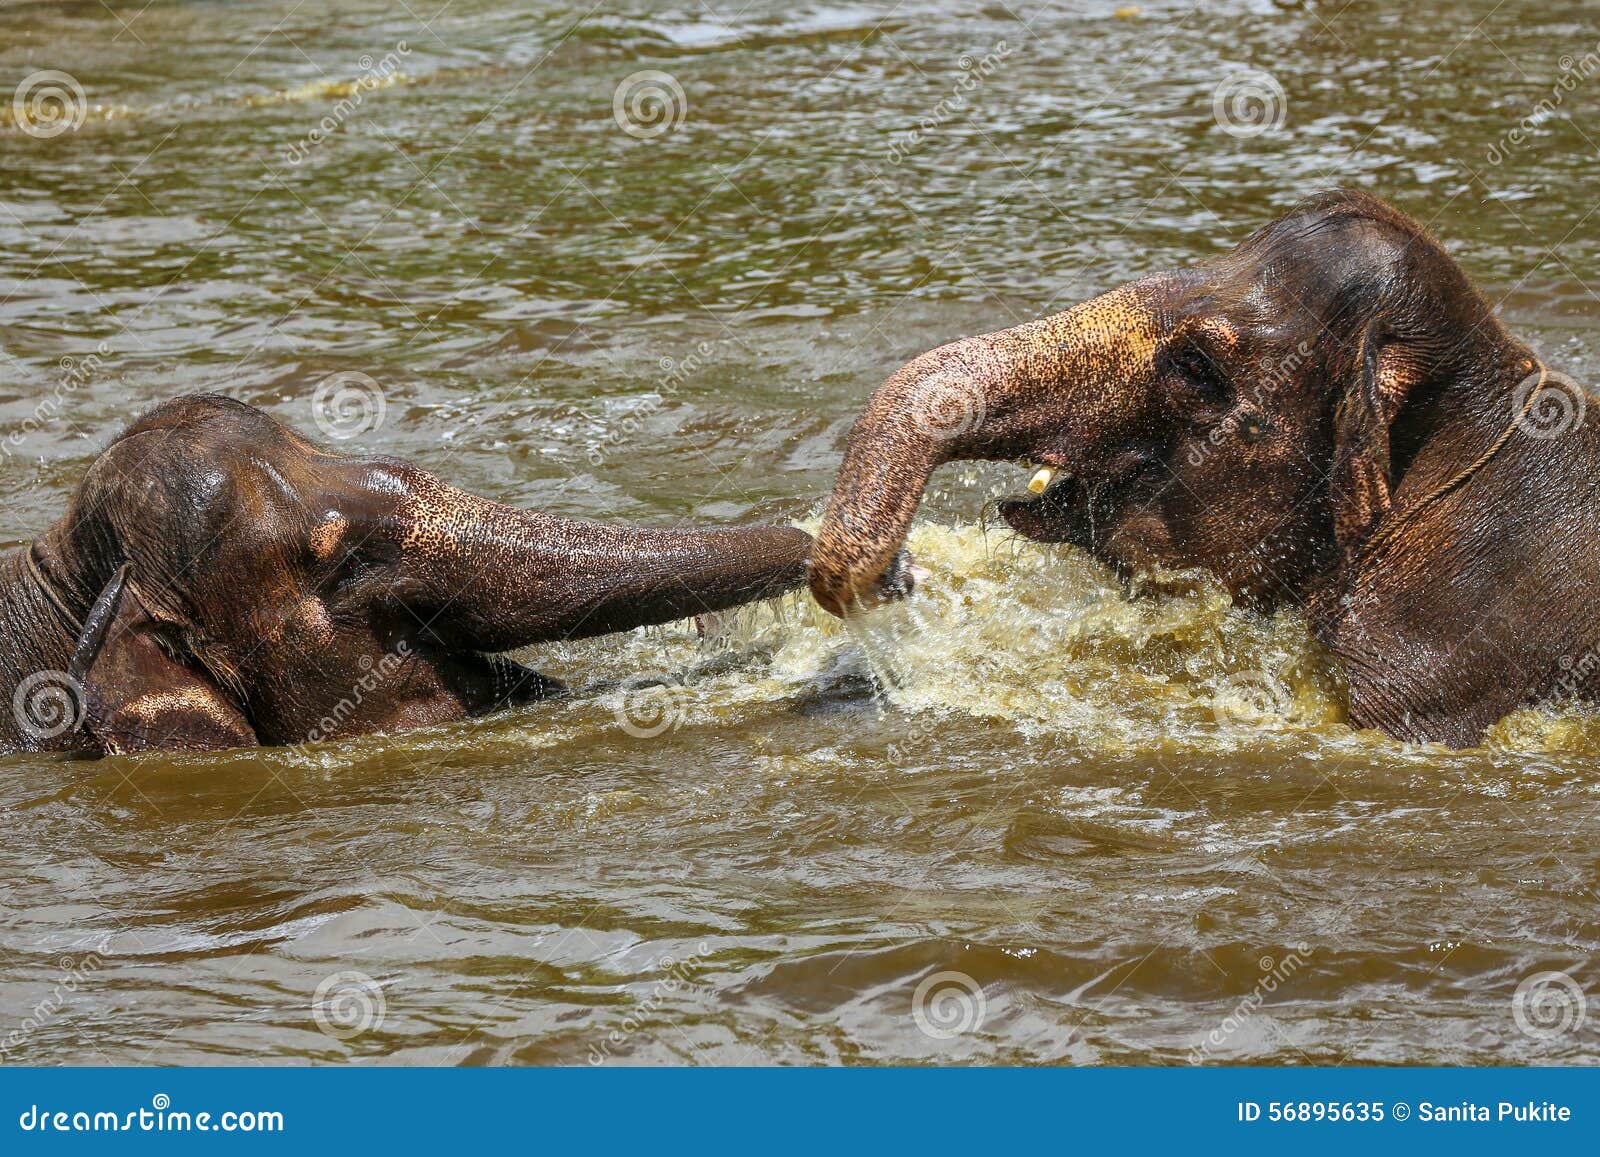 Two Baby Elephants Playing With Each Other In The Water In ...